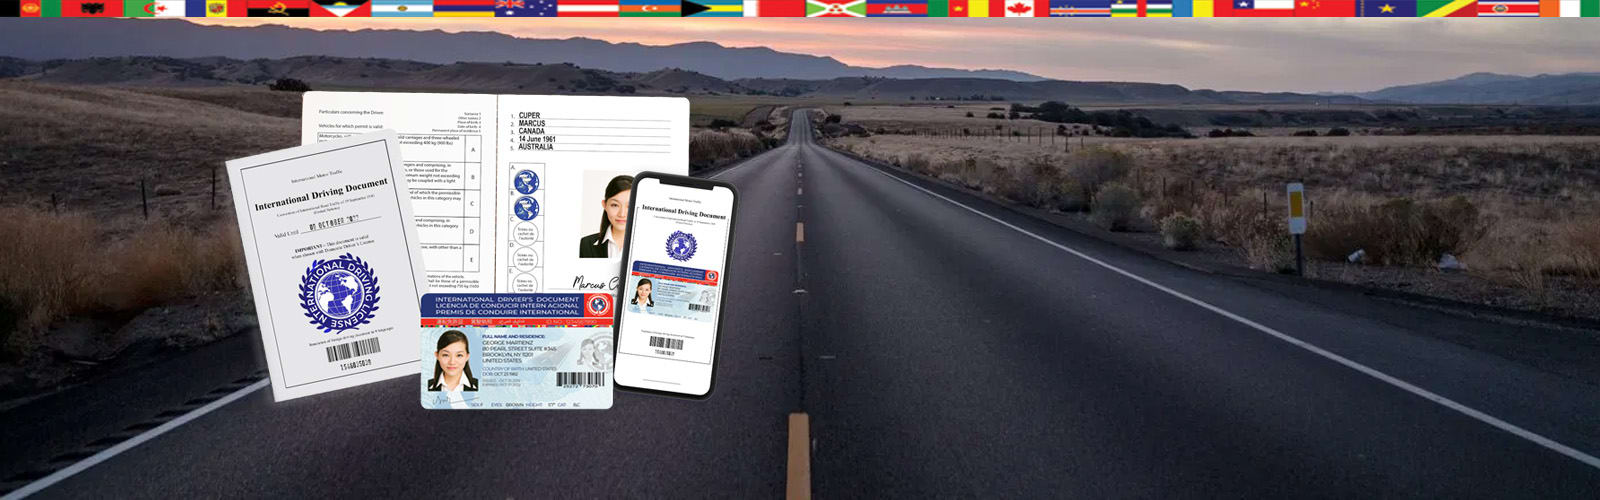 International Driving license and a road picture,IDP